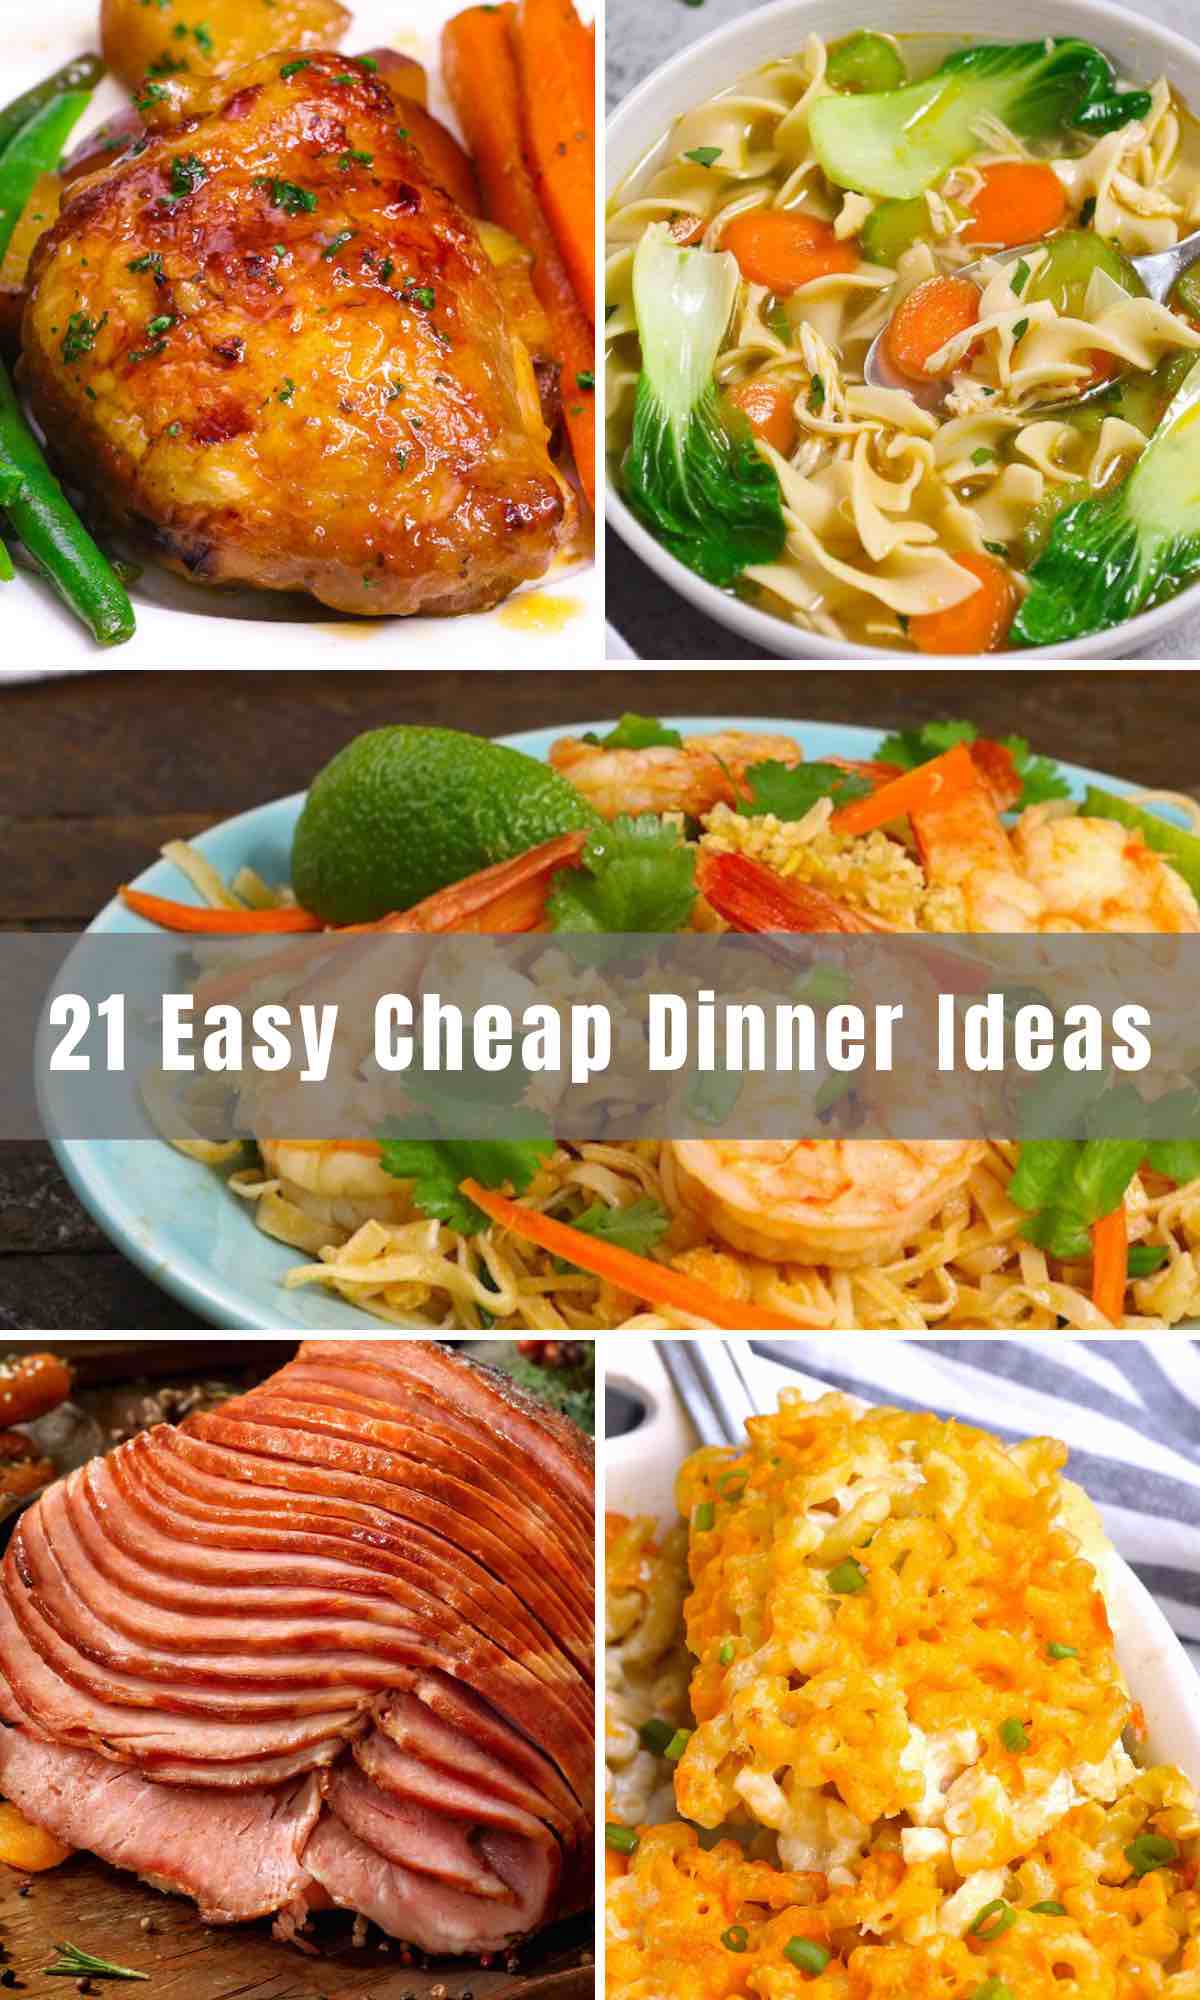 When it comes to food, a budget-friendly dinner doesn’t have to be boring! We’ve rounded up 21 Cheap Dinner Ideas that are easy to make at home. So beyond ramen noodles and try a few of these delicious and affordable dinner recipes.